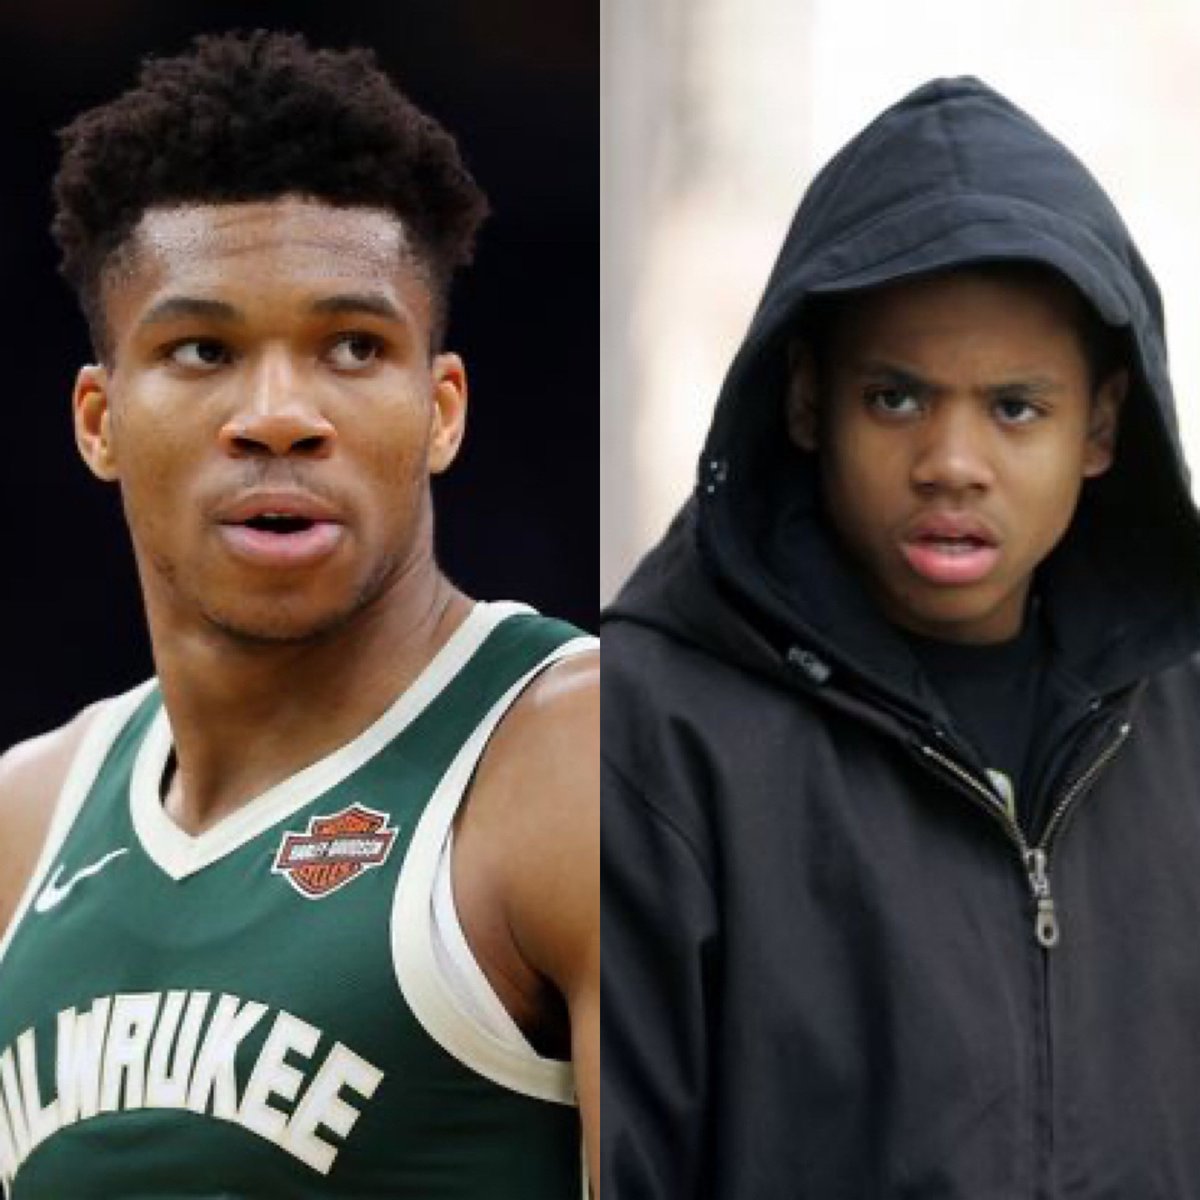 Giannis Michael. Eventually Michael became that nigga at the end of the show. Giannis will get there in due time. But he’s coming.